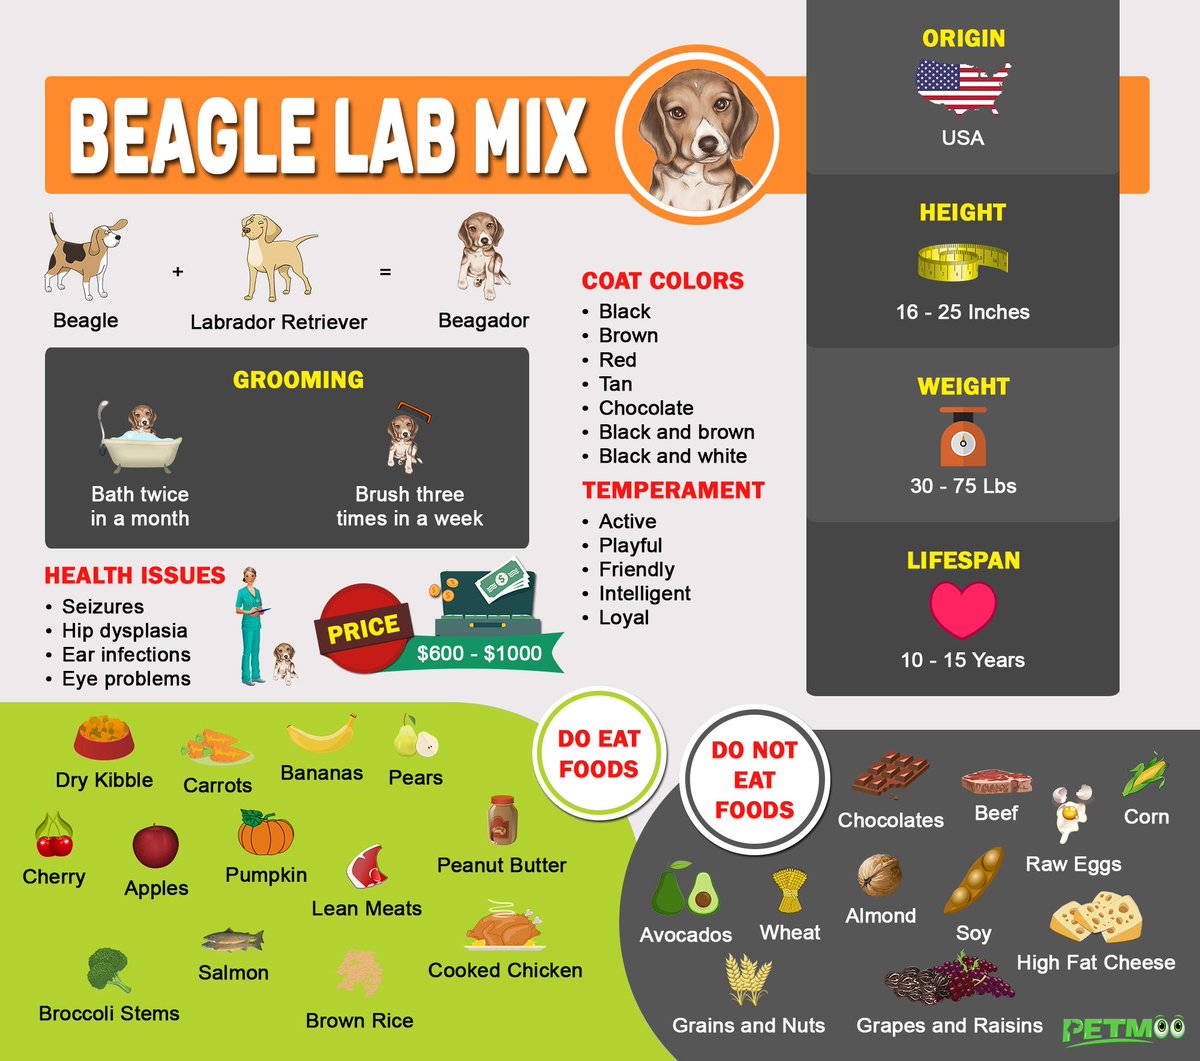 Beagle Lab Mix Infographics
#petmoo #pets #dogs #dogbreeds #doginfographic